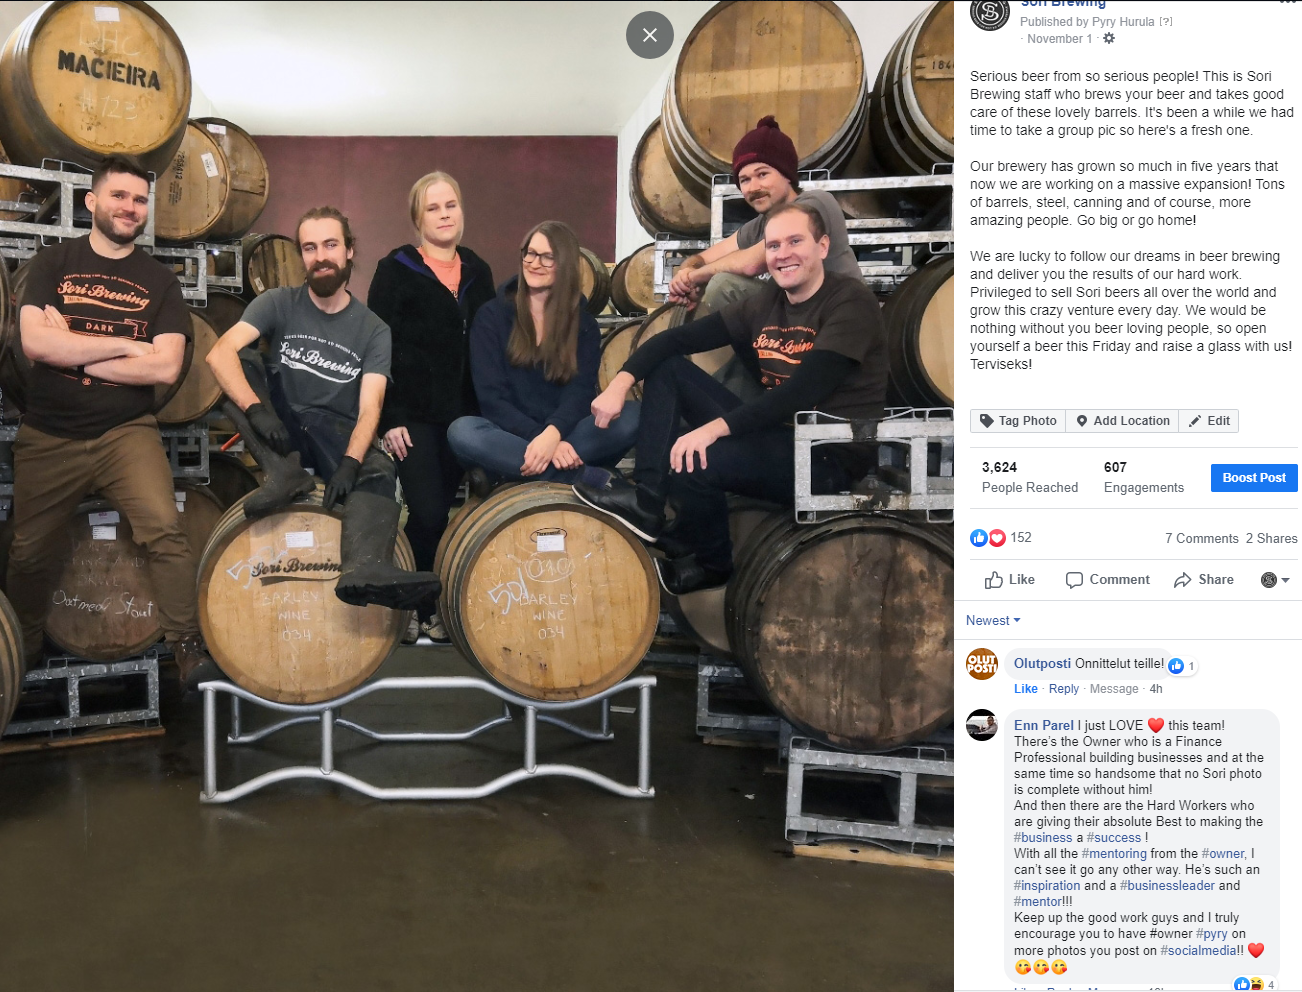 Enn Parel, CEO of Põhjala Brewery commenting on Sori Brewing photo publicly